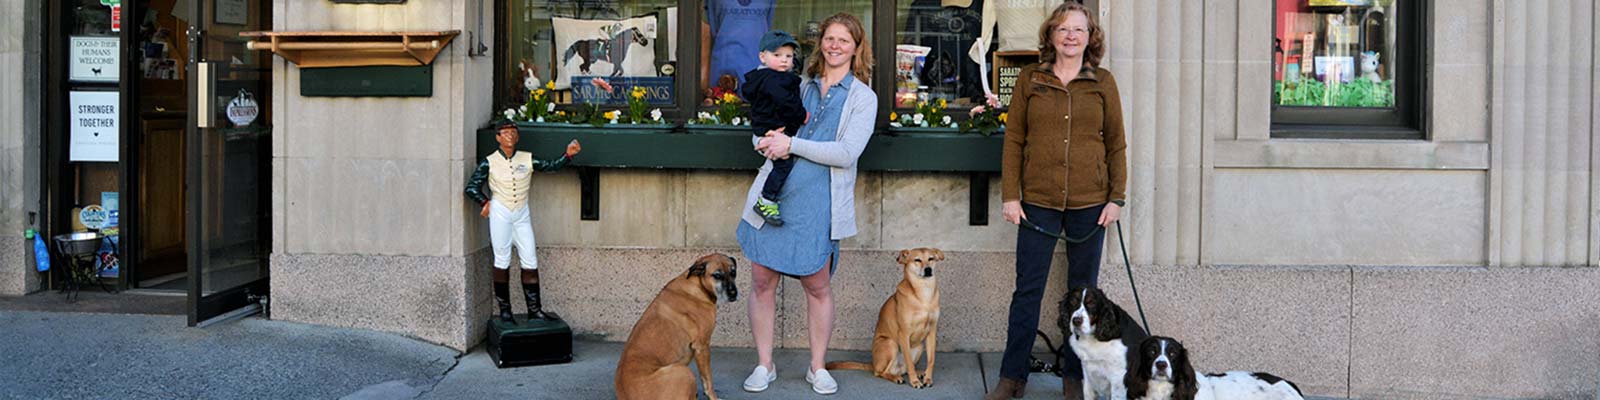 Marianne, Maddy and their dogs in front of Impressions of Saratoga